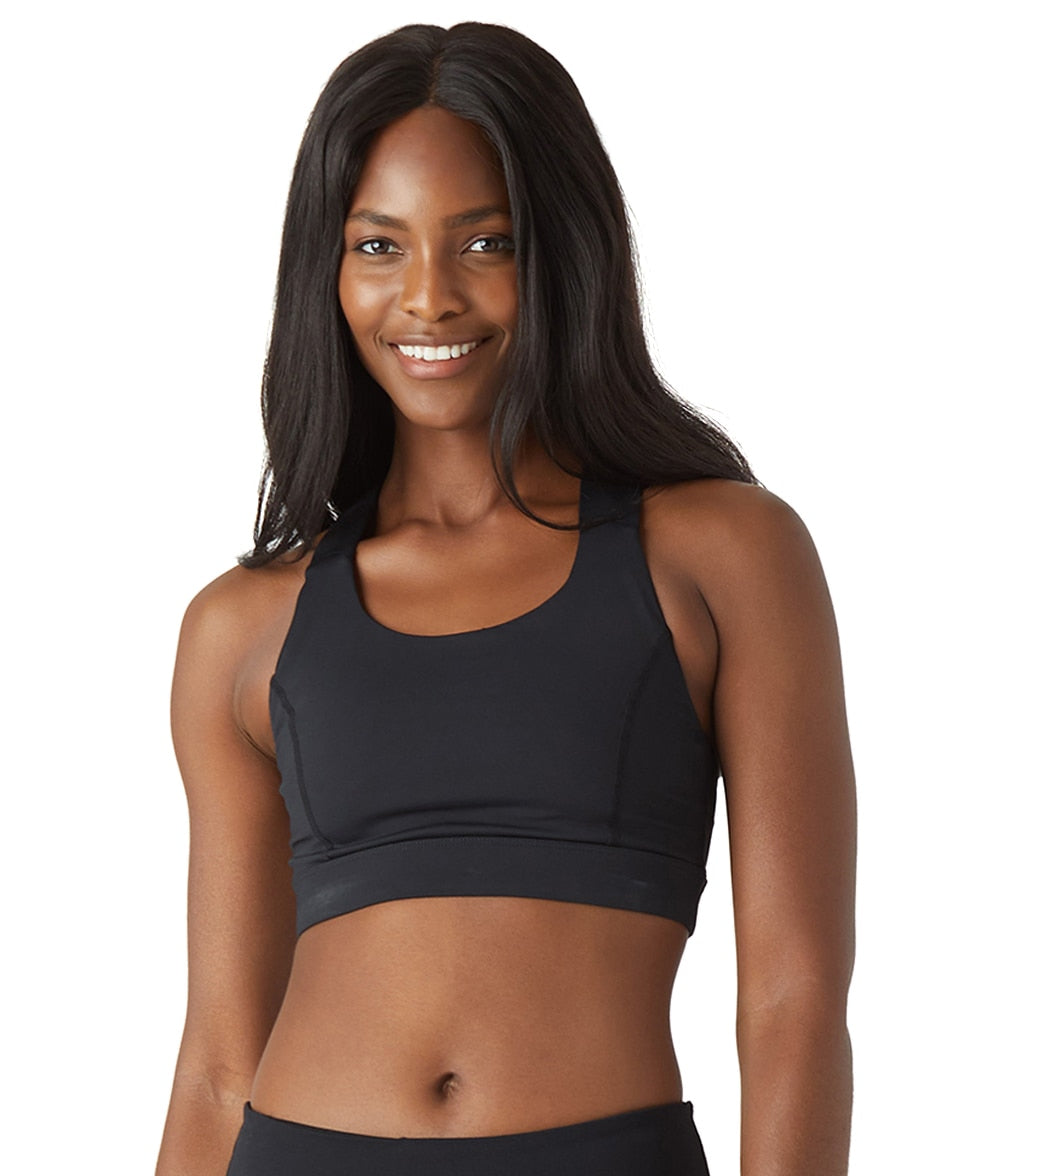 Glyder Full Force Yoga Sports Bra at YogaOutlet.com - Free Shipping –